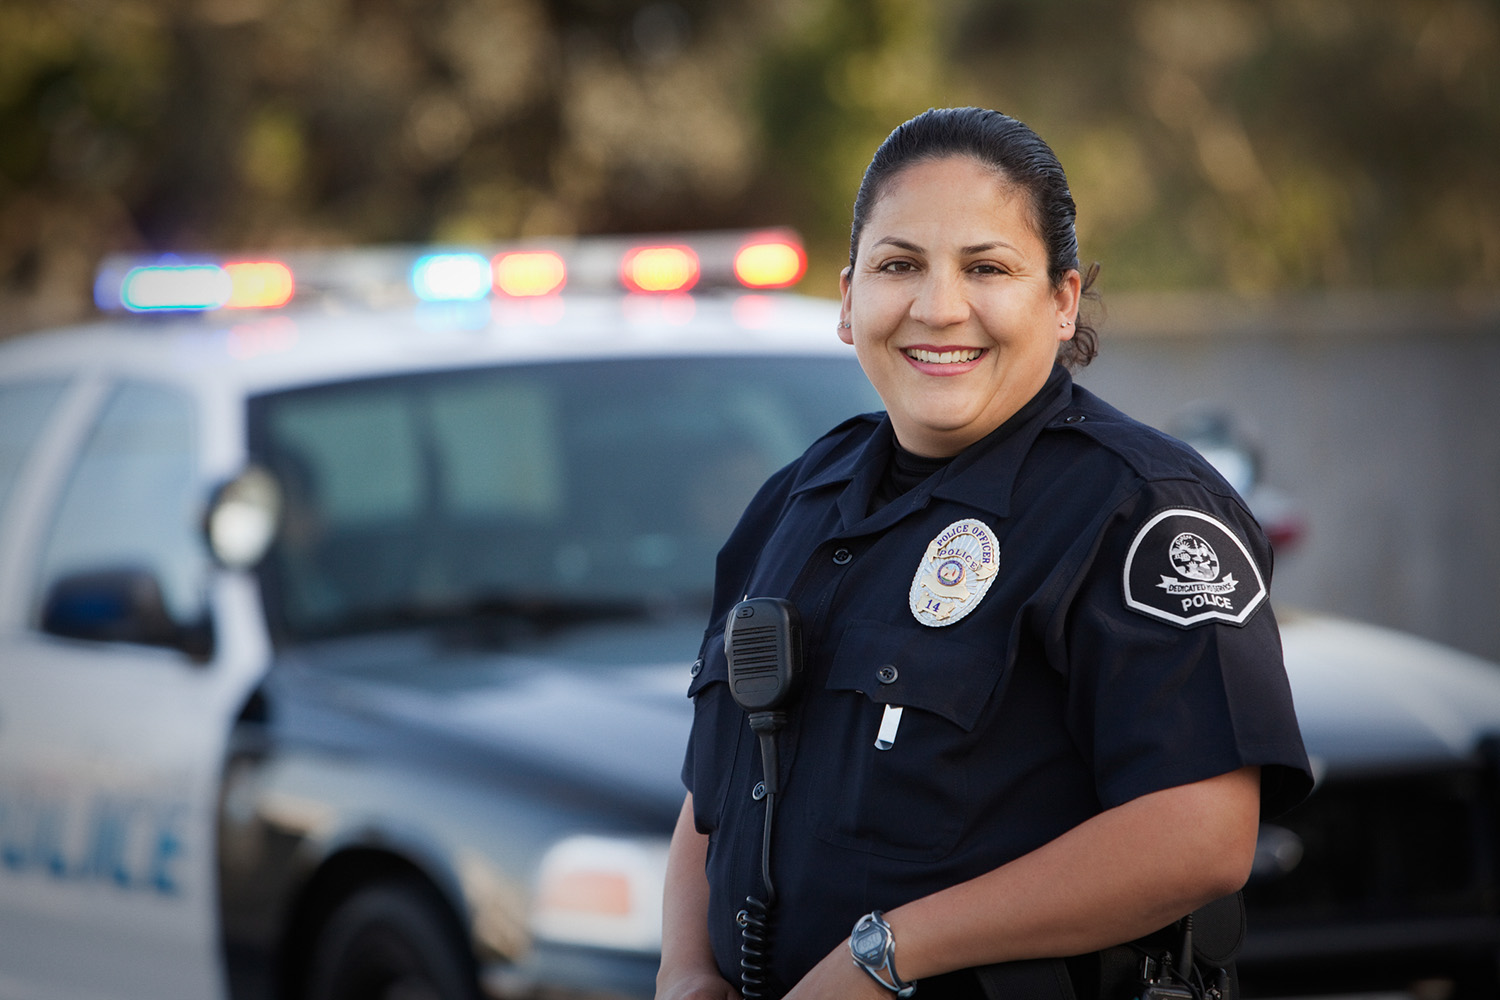 Female police officer standing in front of her squad car smiling